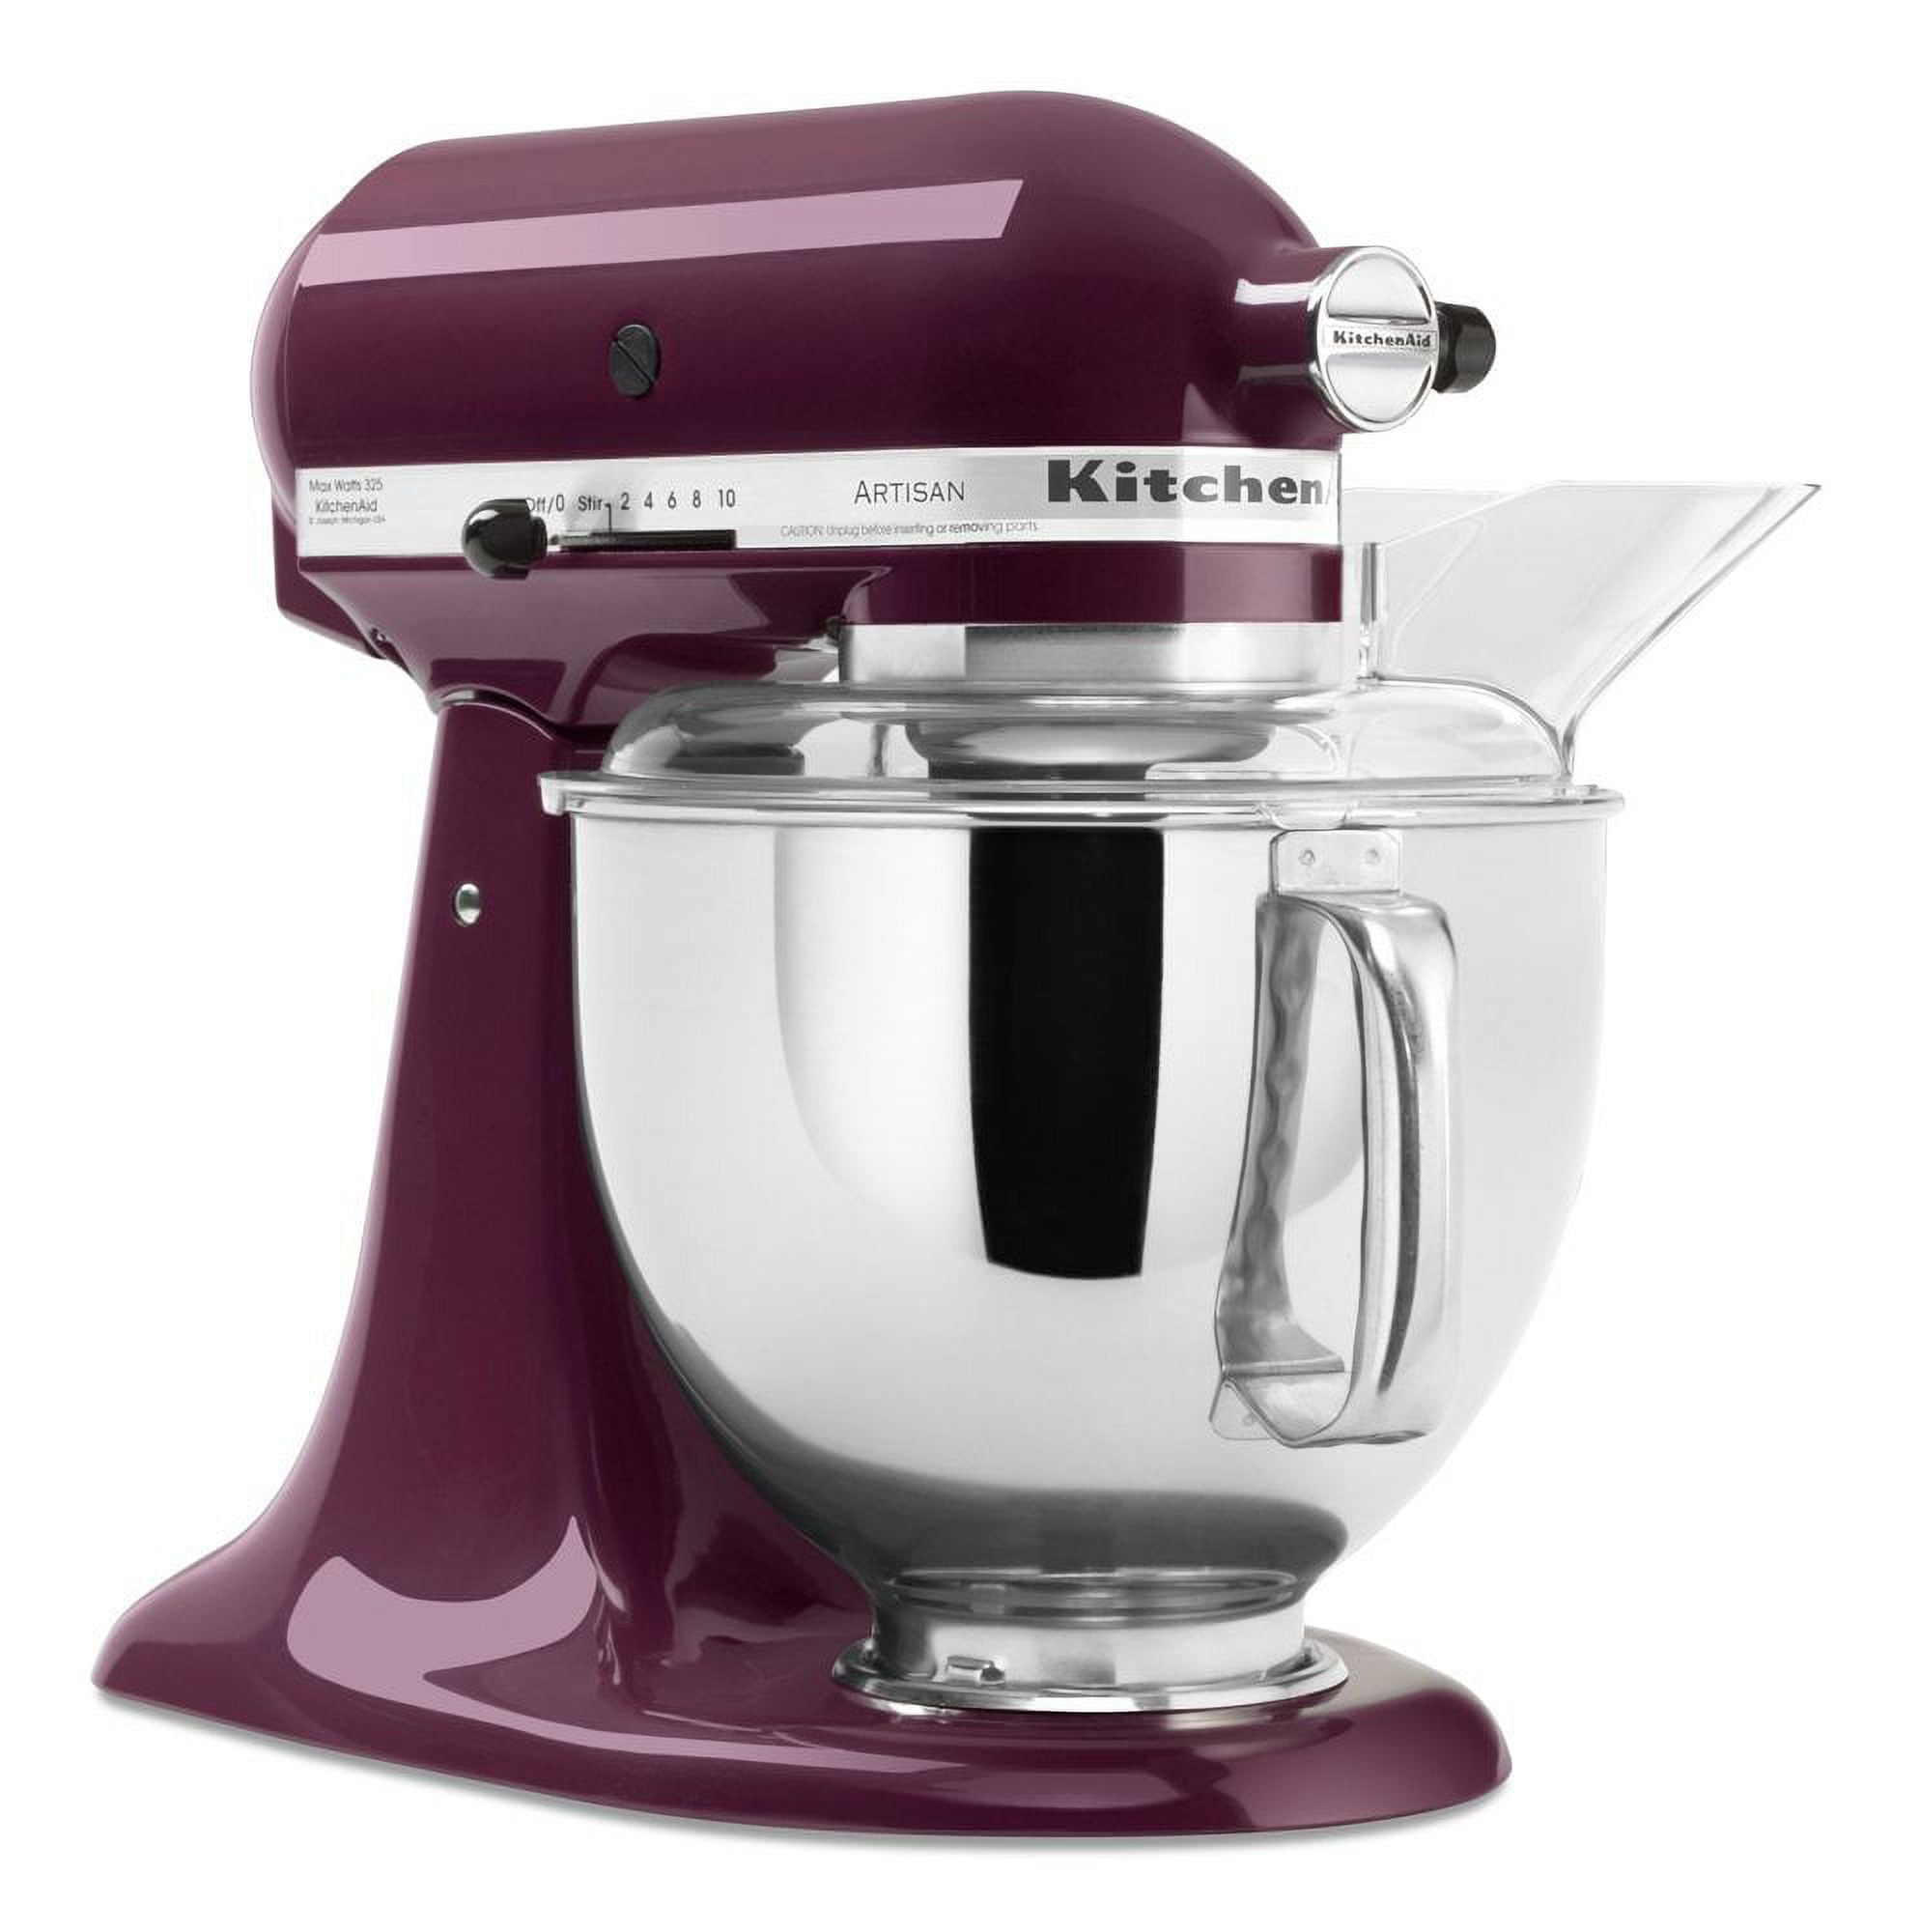 Review of the new KitchenAid 7-Qt. Stand Mixer & a Recipe for  Cranberry-Chocolate Cookies - Page 2 of 2 - Pratesi Living